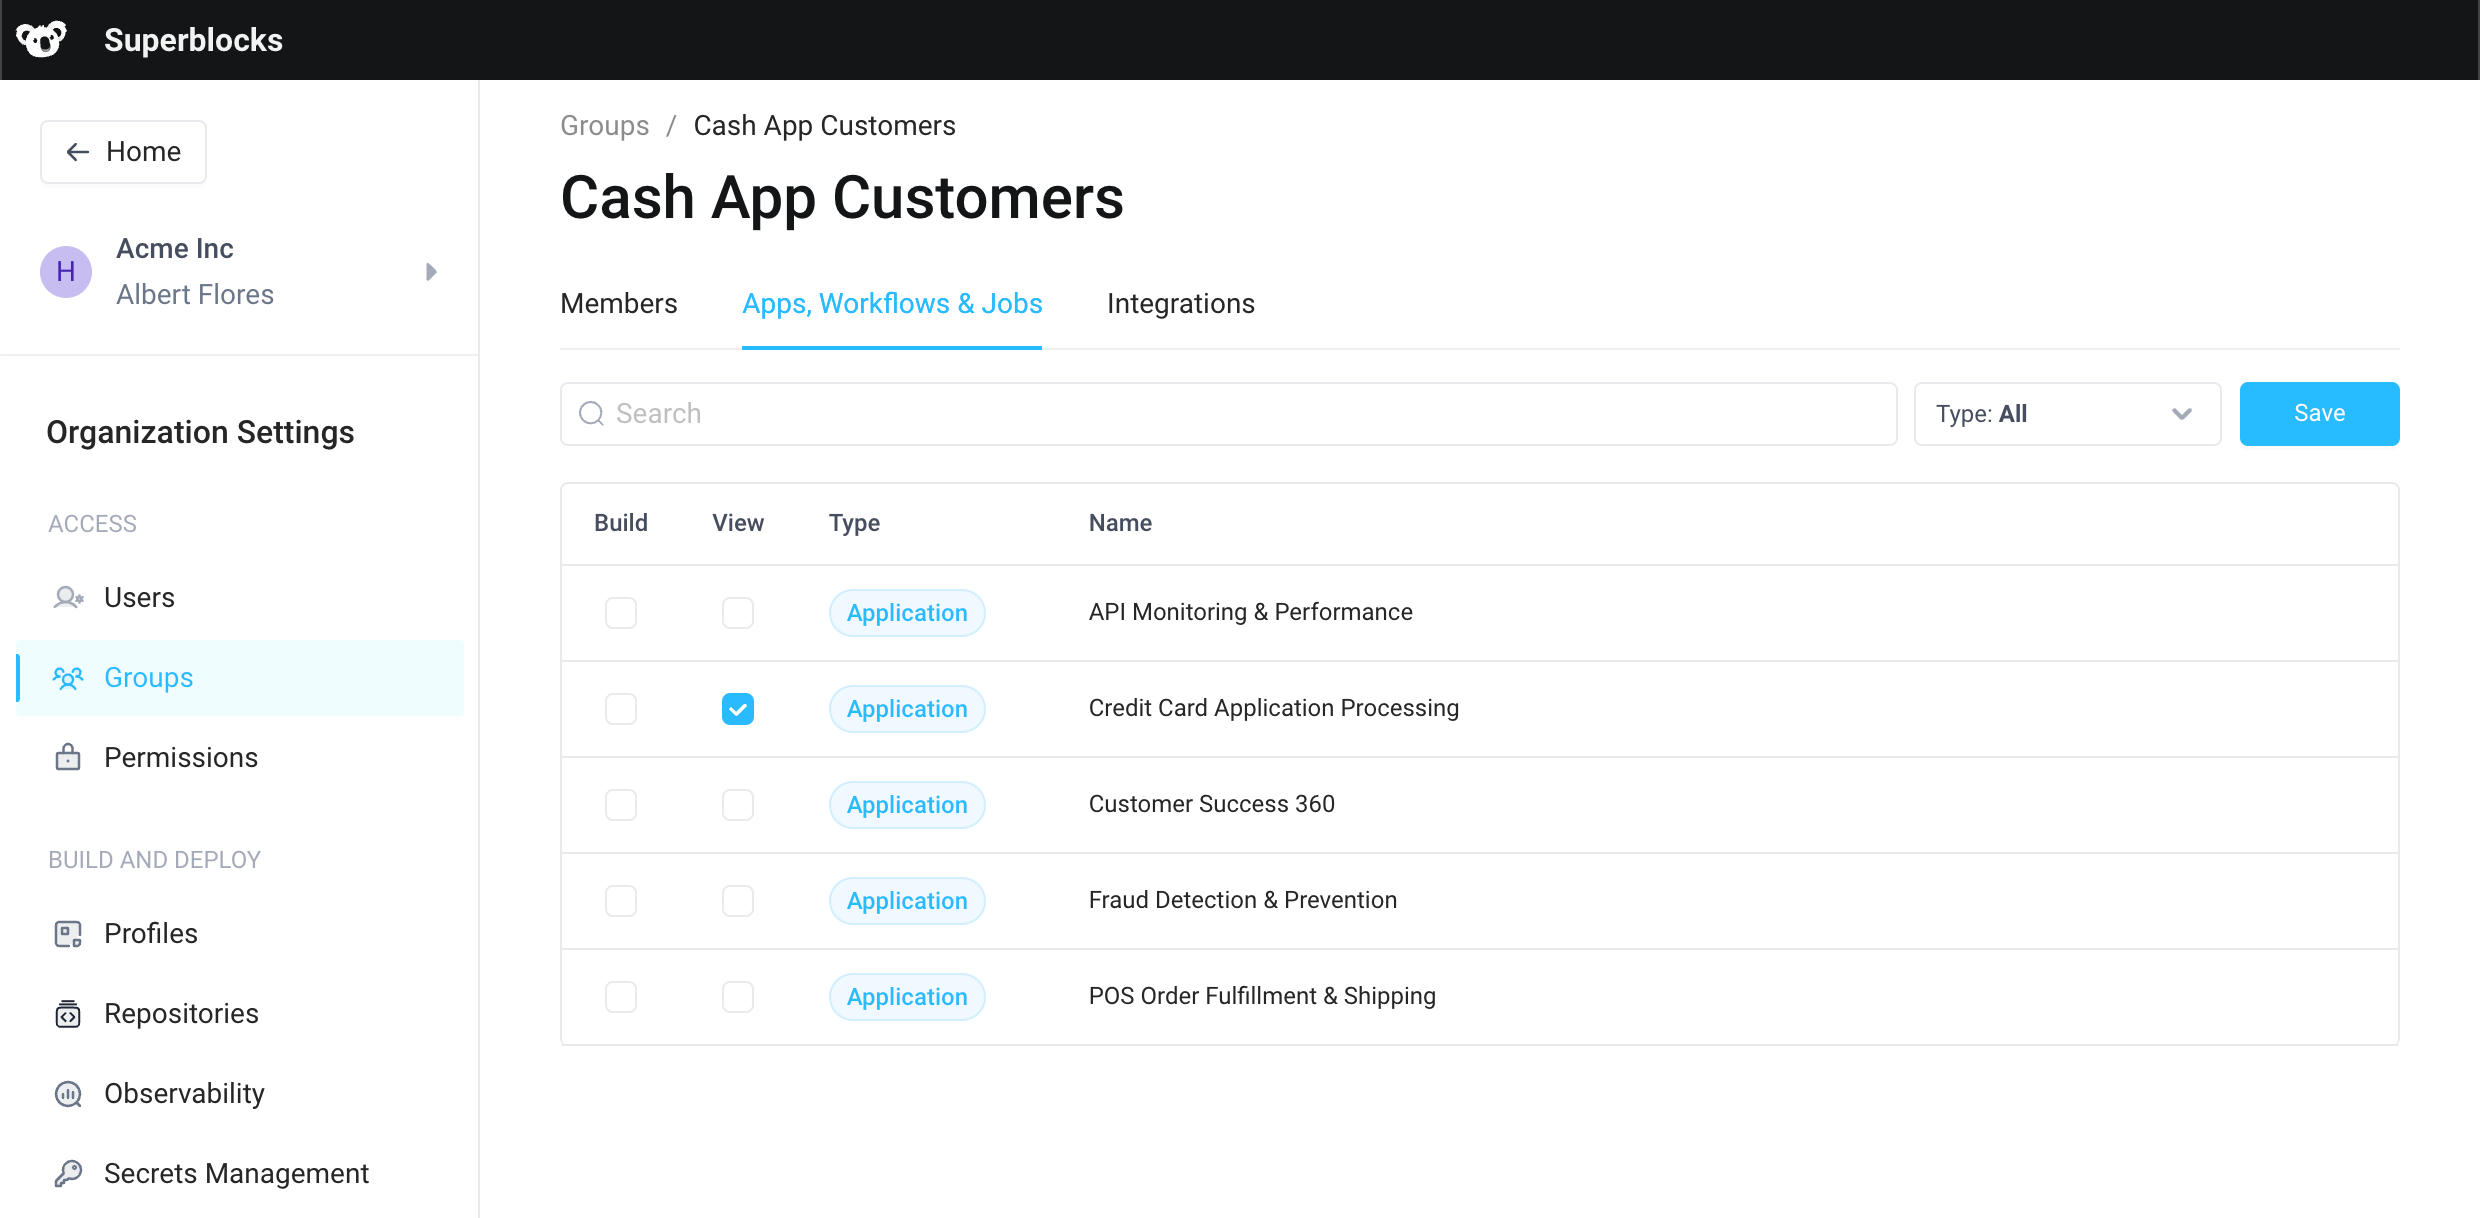 Cash App Customer user group with view access to &quot;Credit Card Application Processing&quot; tool